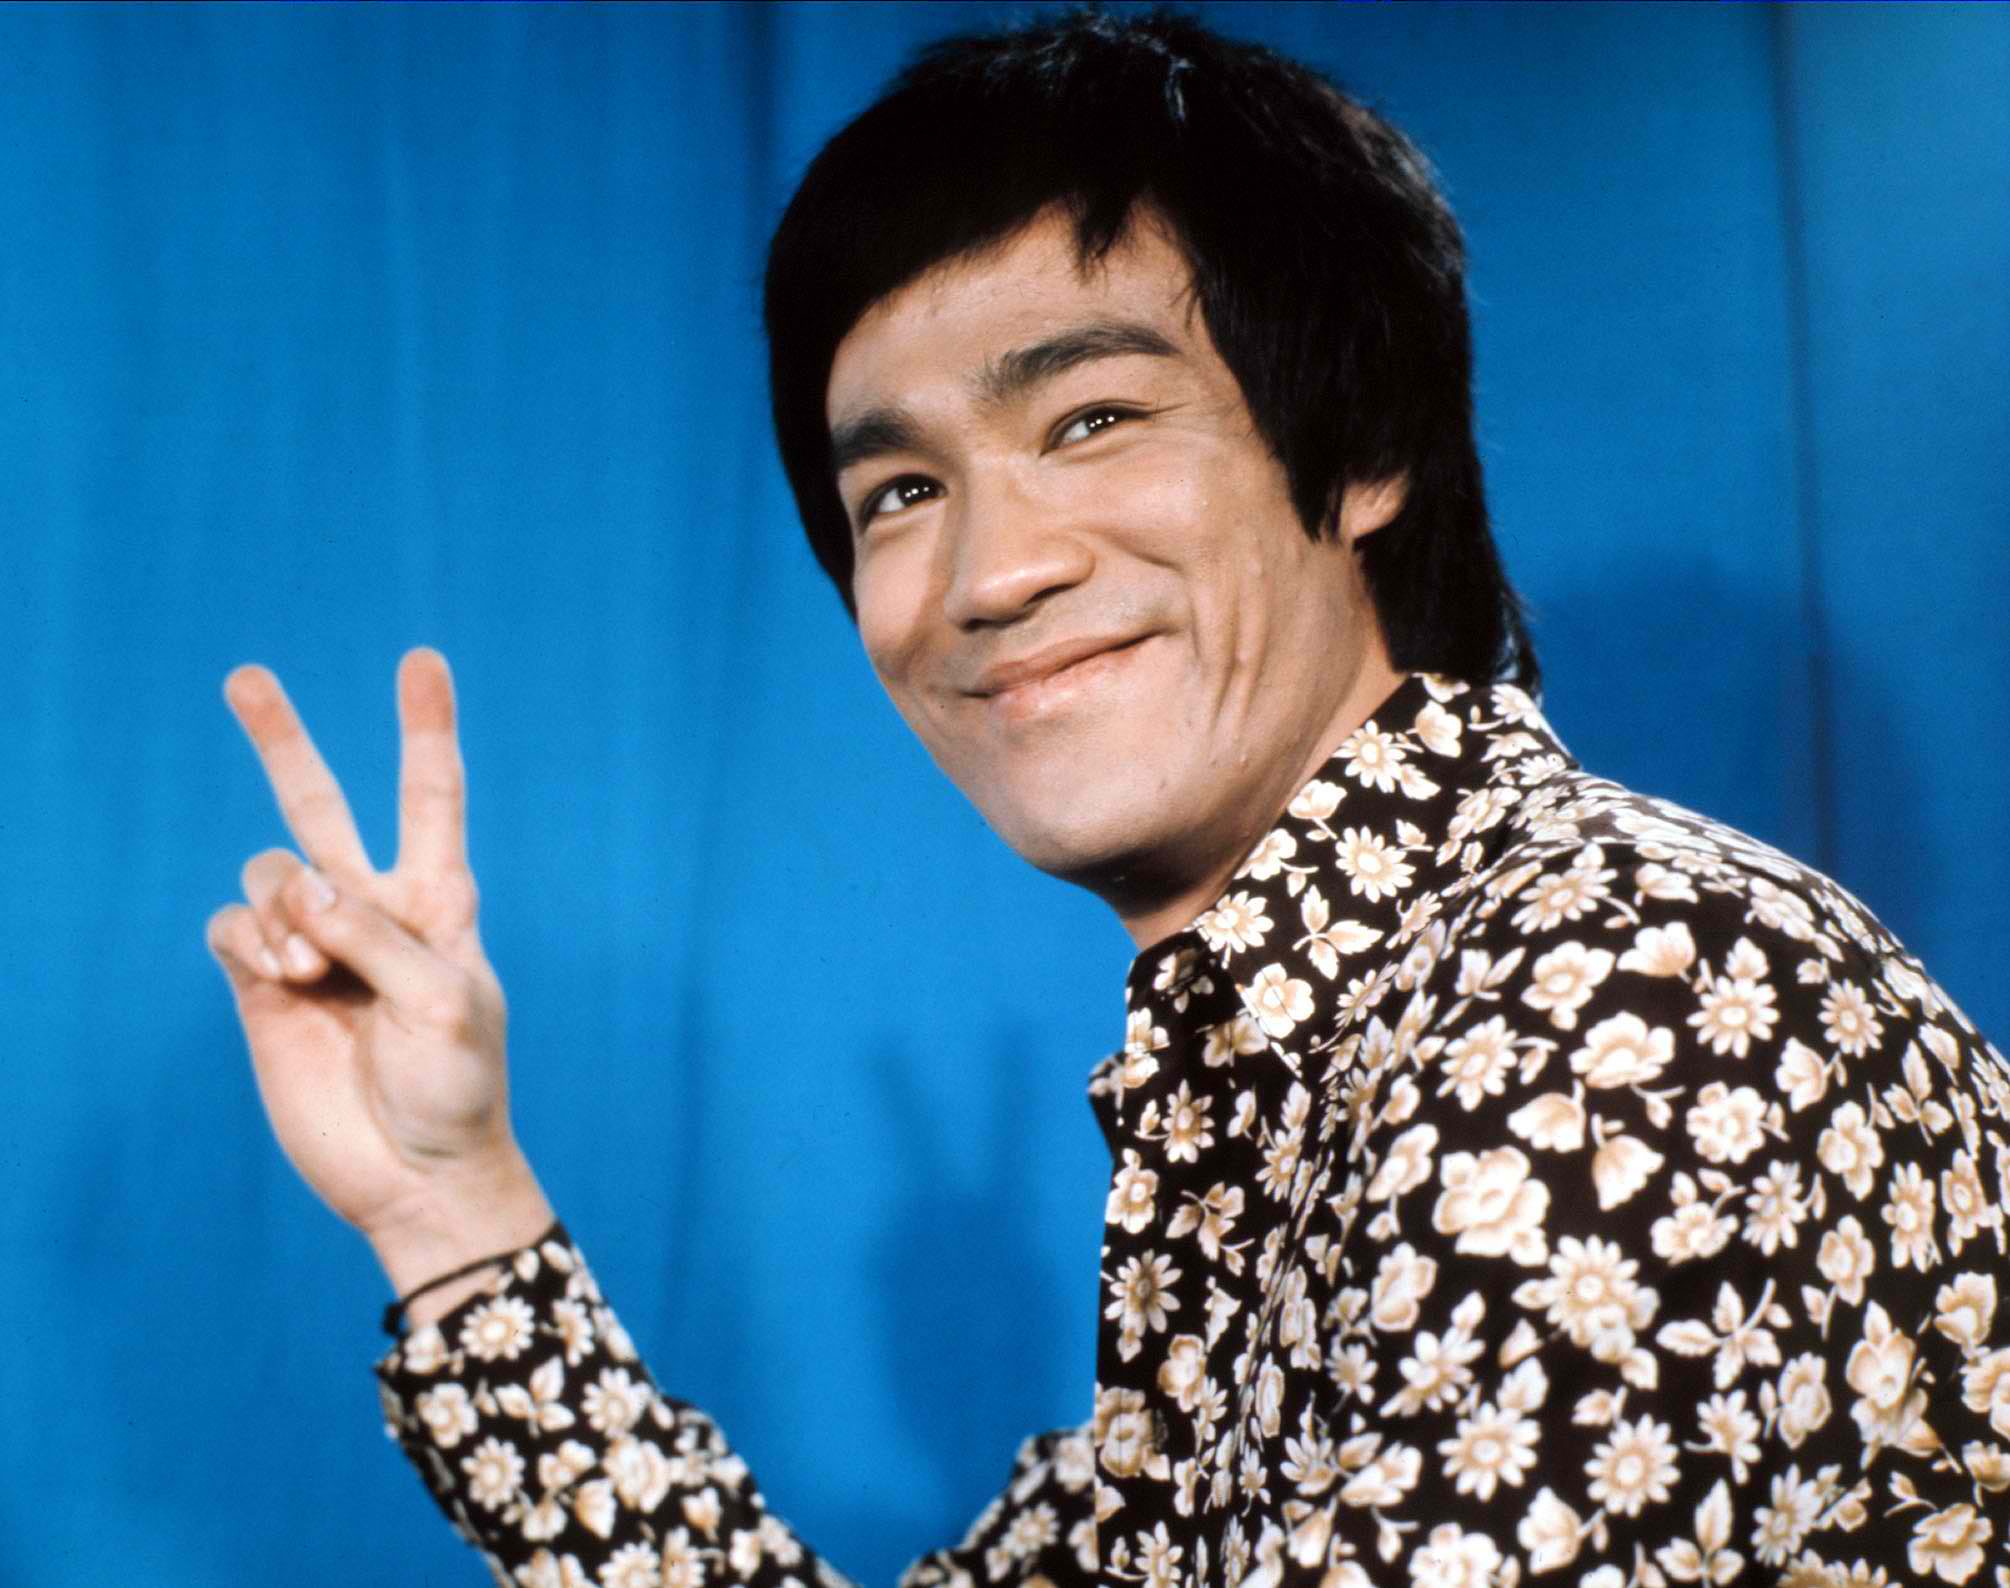 Bruce Lee Actor Celebrity Wallpaper Hd Man 4k Wallpapers Images Photos And Background Wallpapers Den